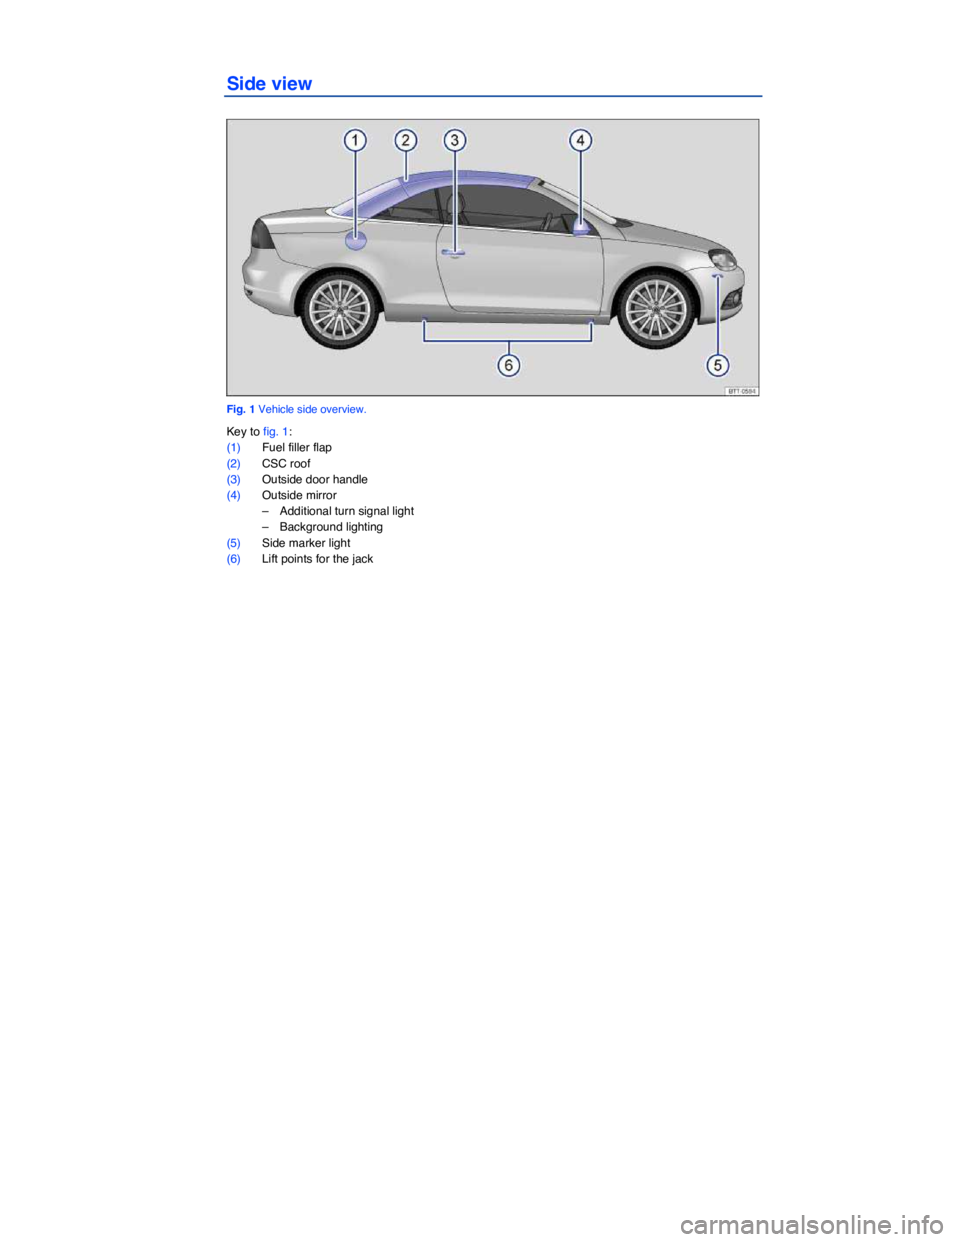 VOLKSWAGEN EOS 2021  Owner´s Manual  
 
Side view 
 
Fig. 1 Vehicle side overview. 
Key to fig. 1: 
(1) Fuel filler flap  
(2) CSC roof  
(3) Outside door handle  
(4) Outside mirror  
–  Additional turn signal light  
–  Background